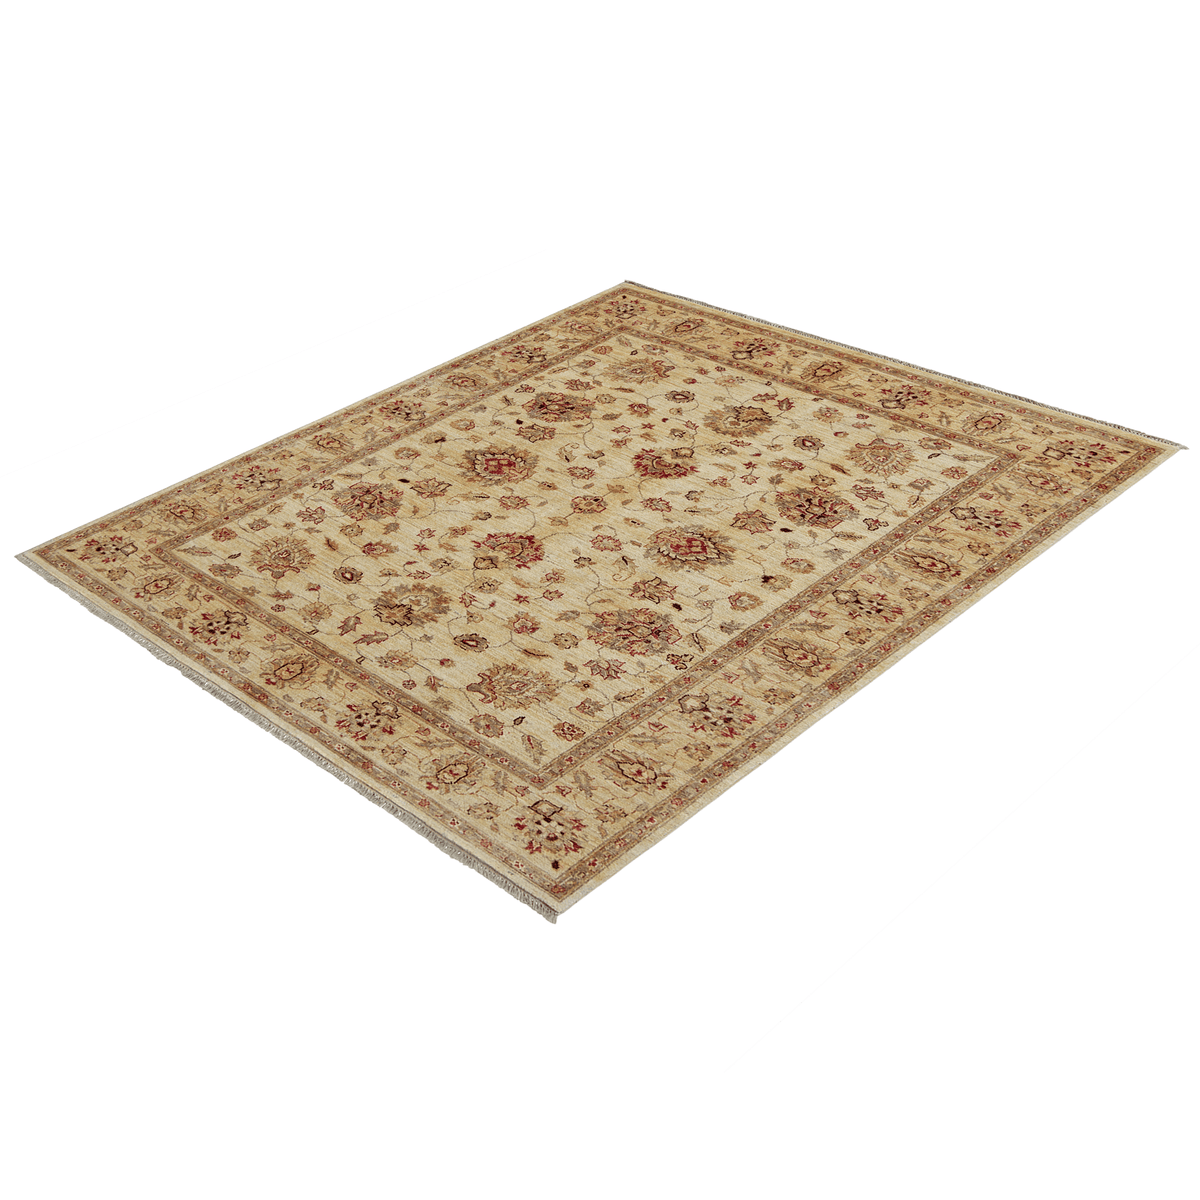 Fine Hand-knotted Ziegler Himalayan Wool Rug 147cm x 191cm